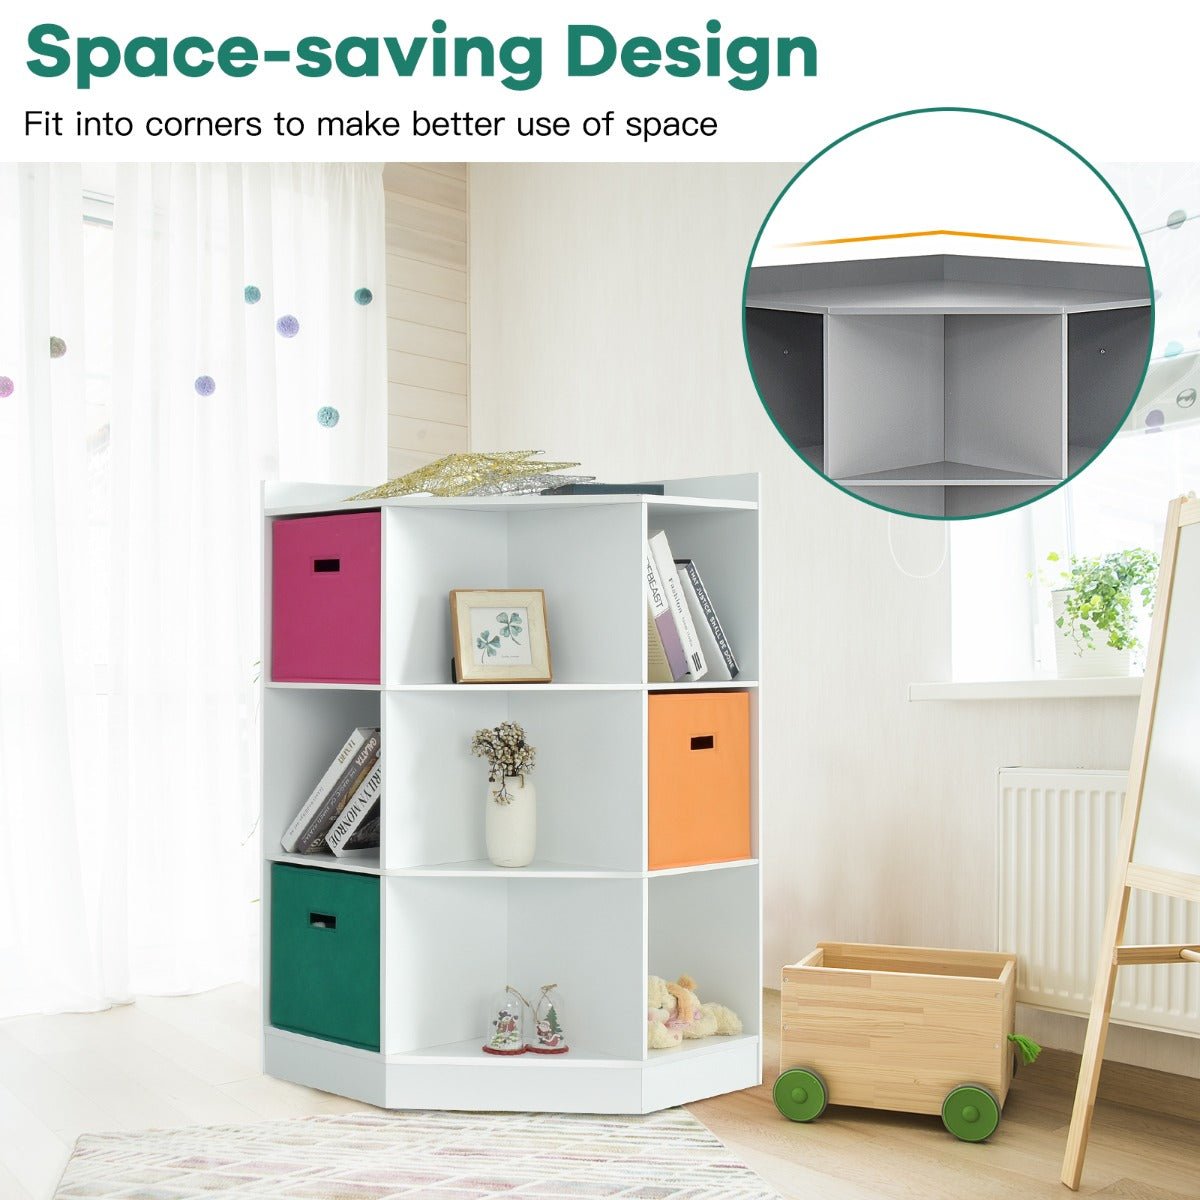 9-Section Toy Storage Organizer: Where Play Meets Neatness